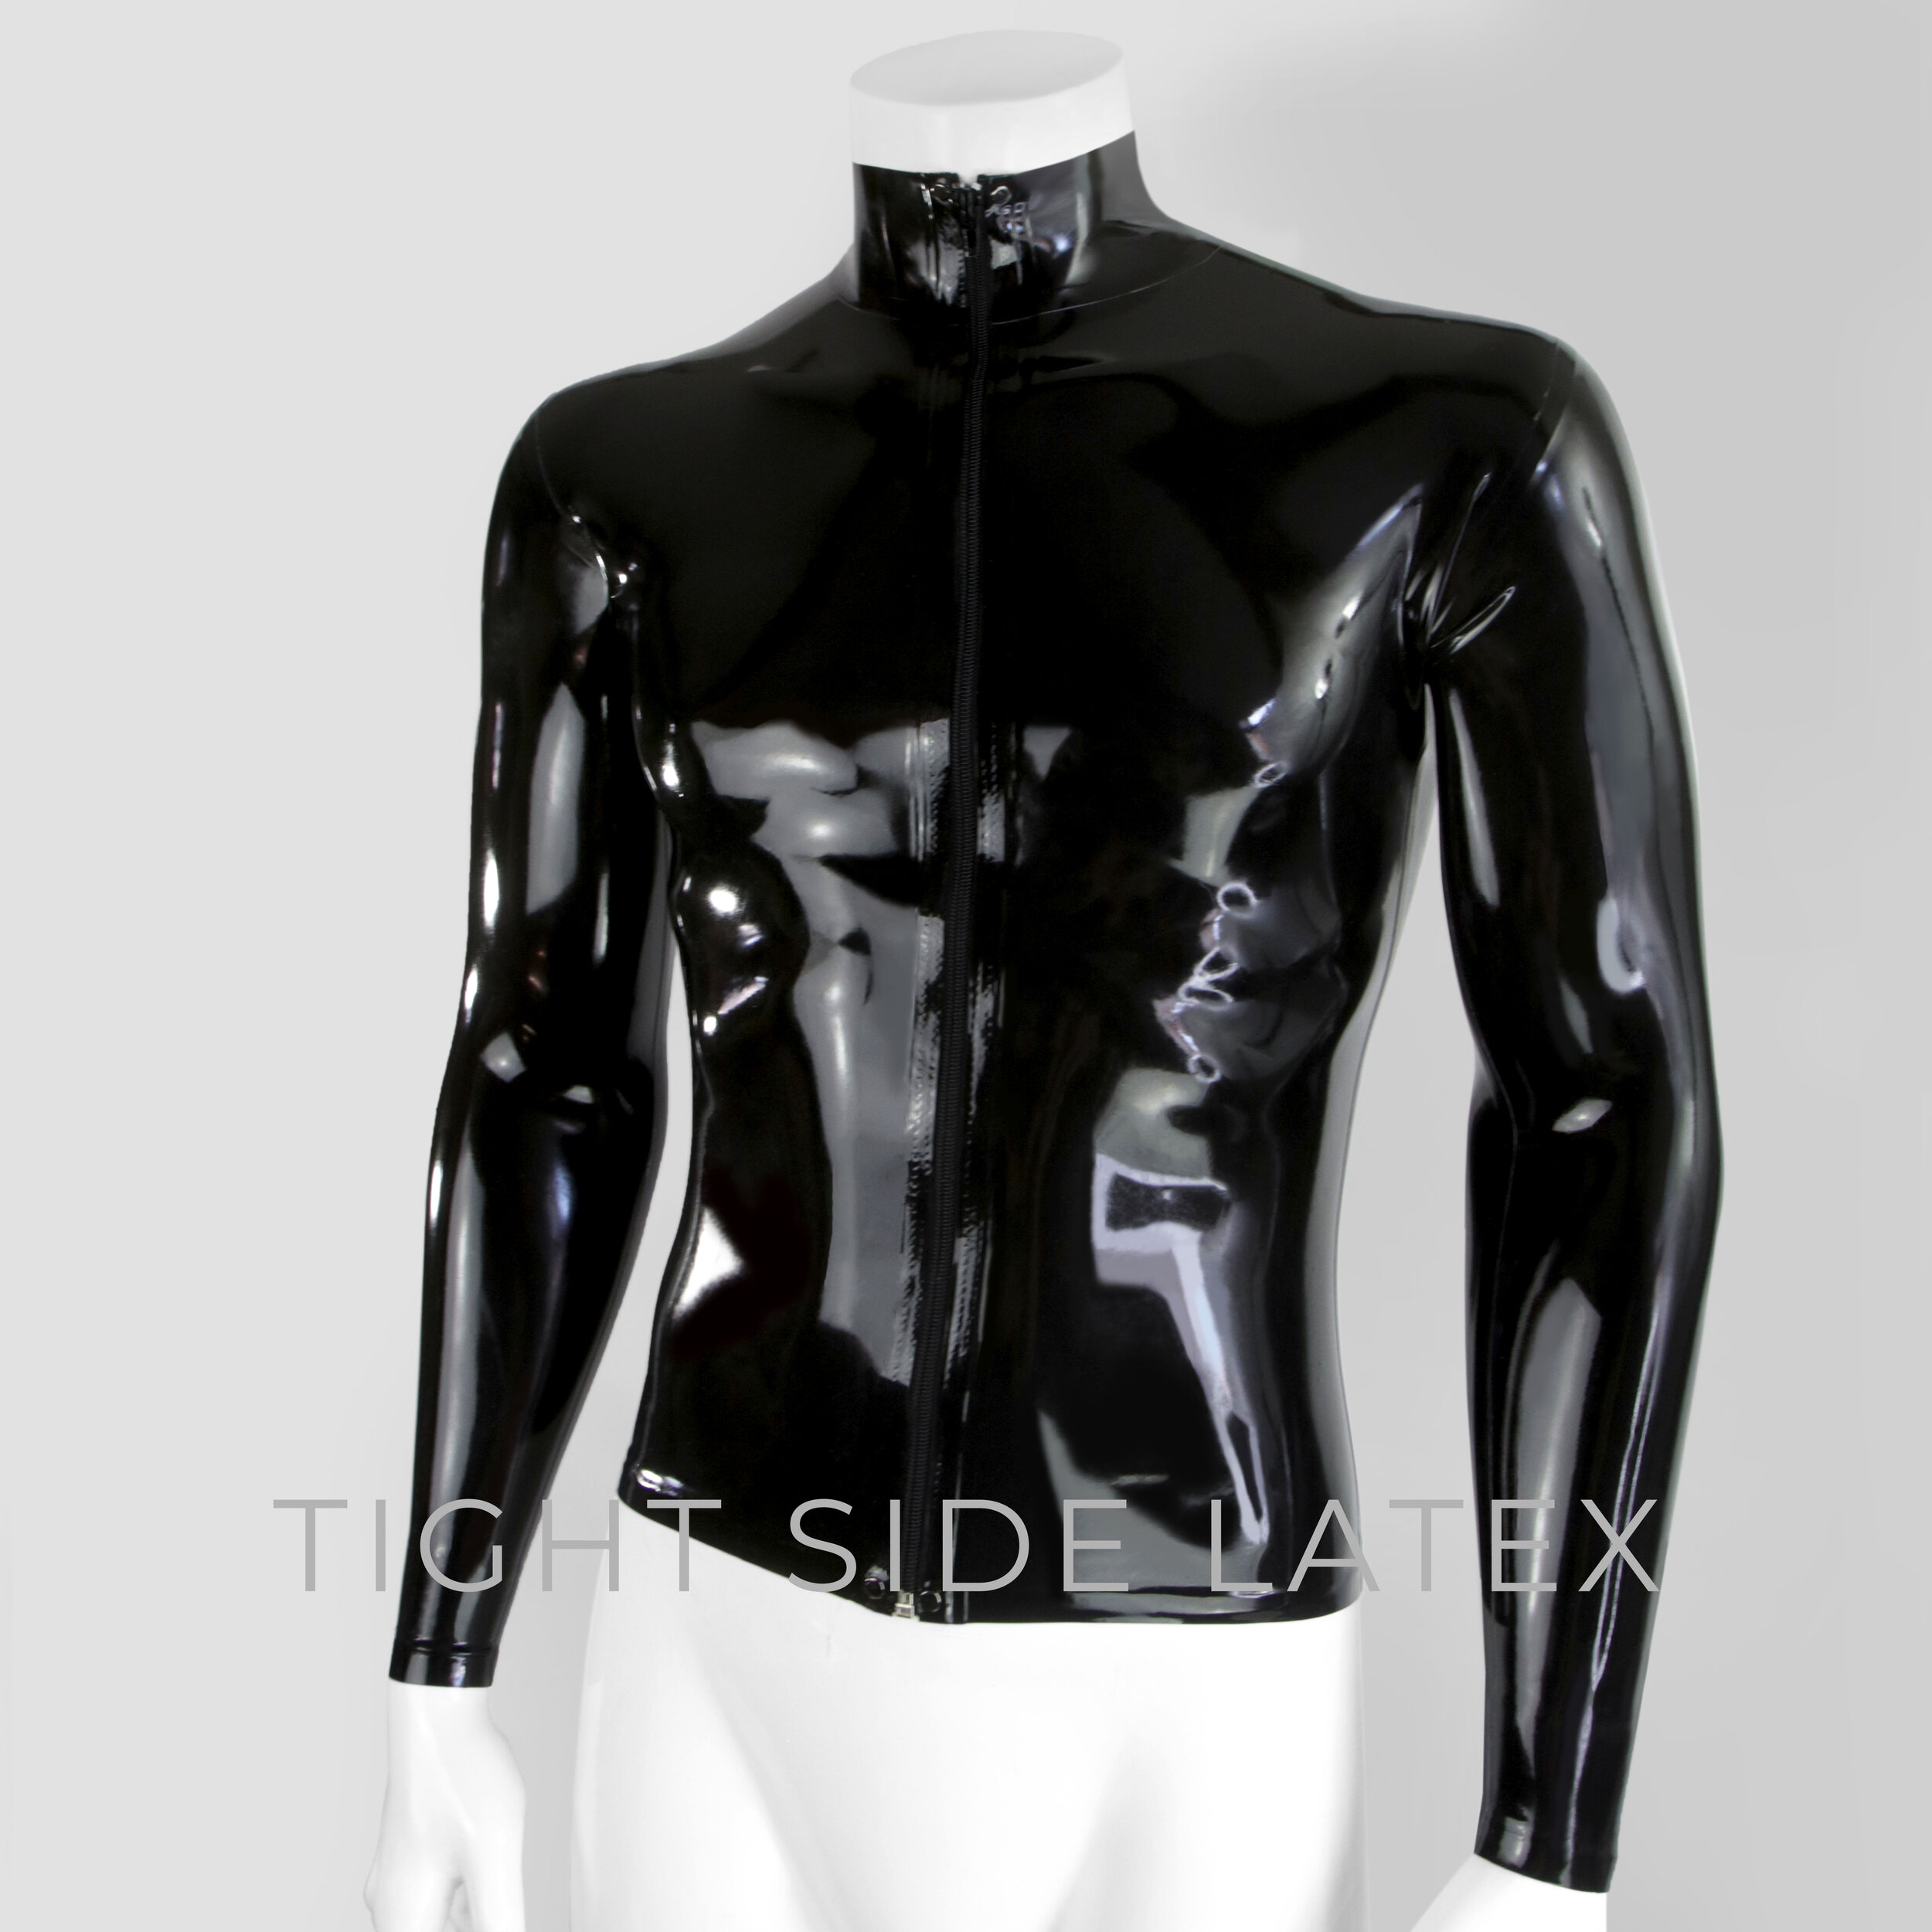 Mens Latex Buckle and Belt Shorts - TIGHT SIDE LATEX